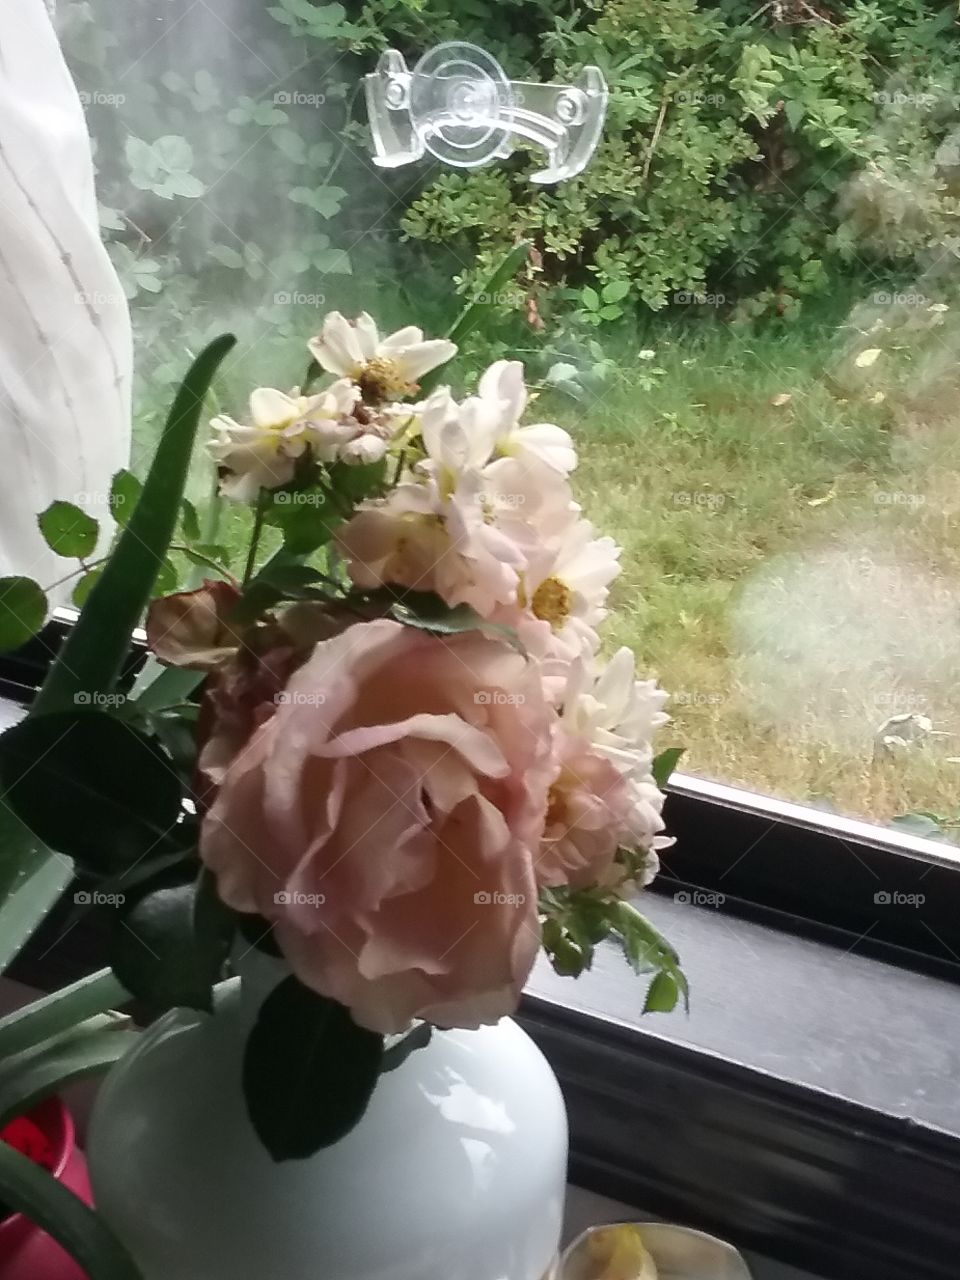 roses are pink, and so are you!